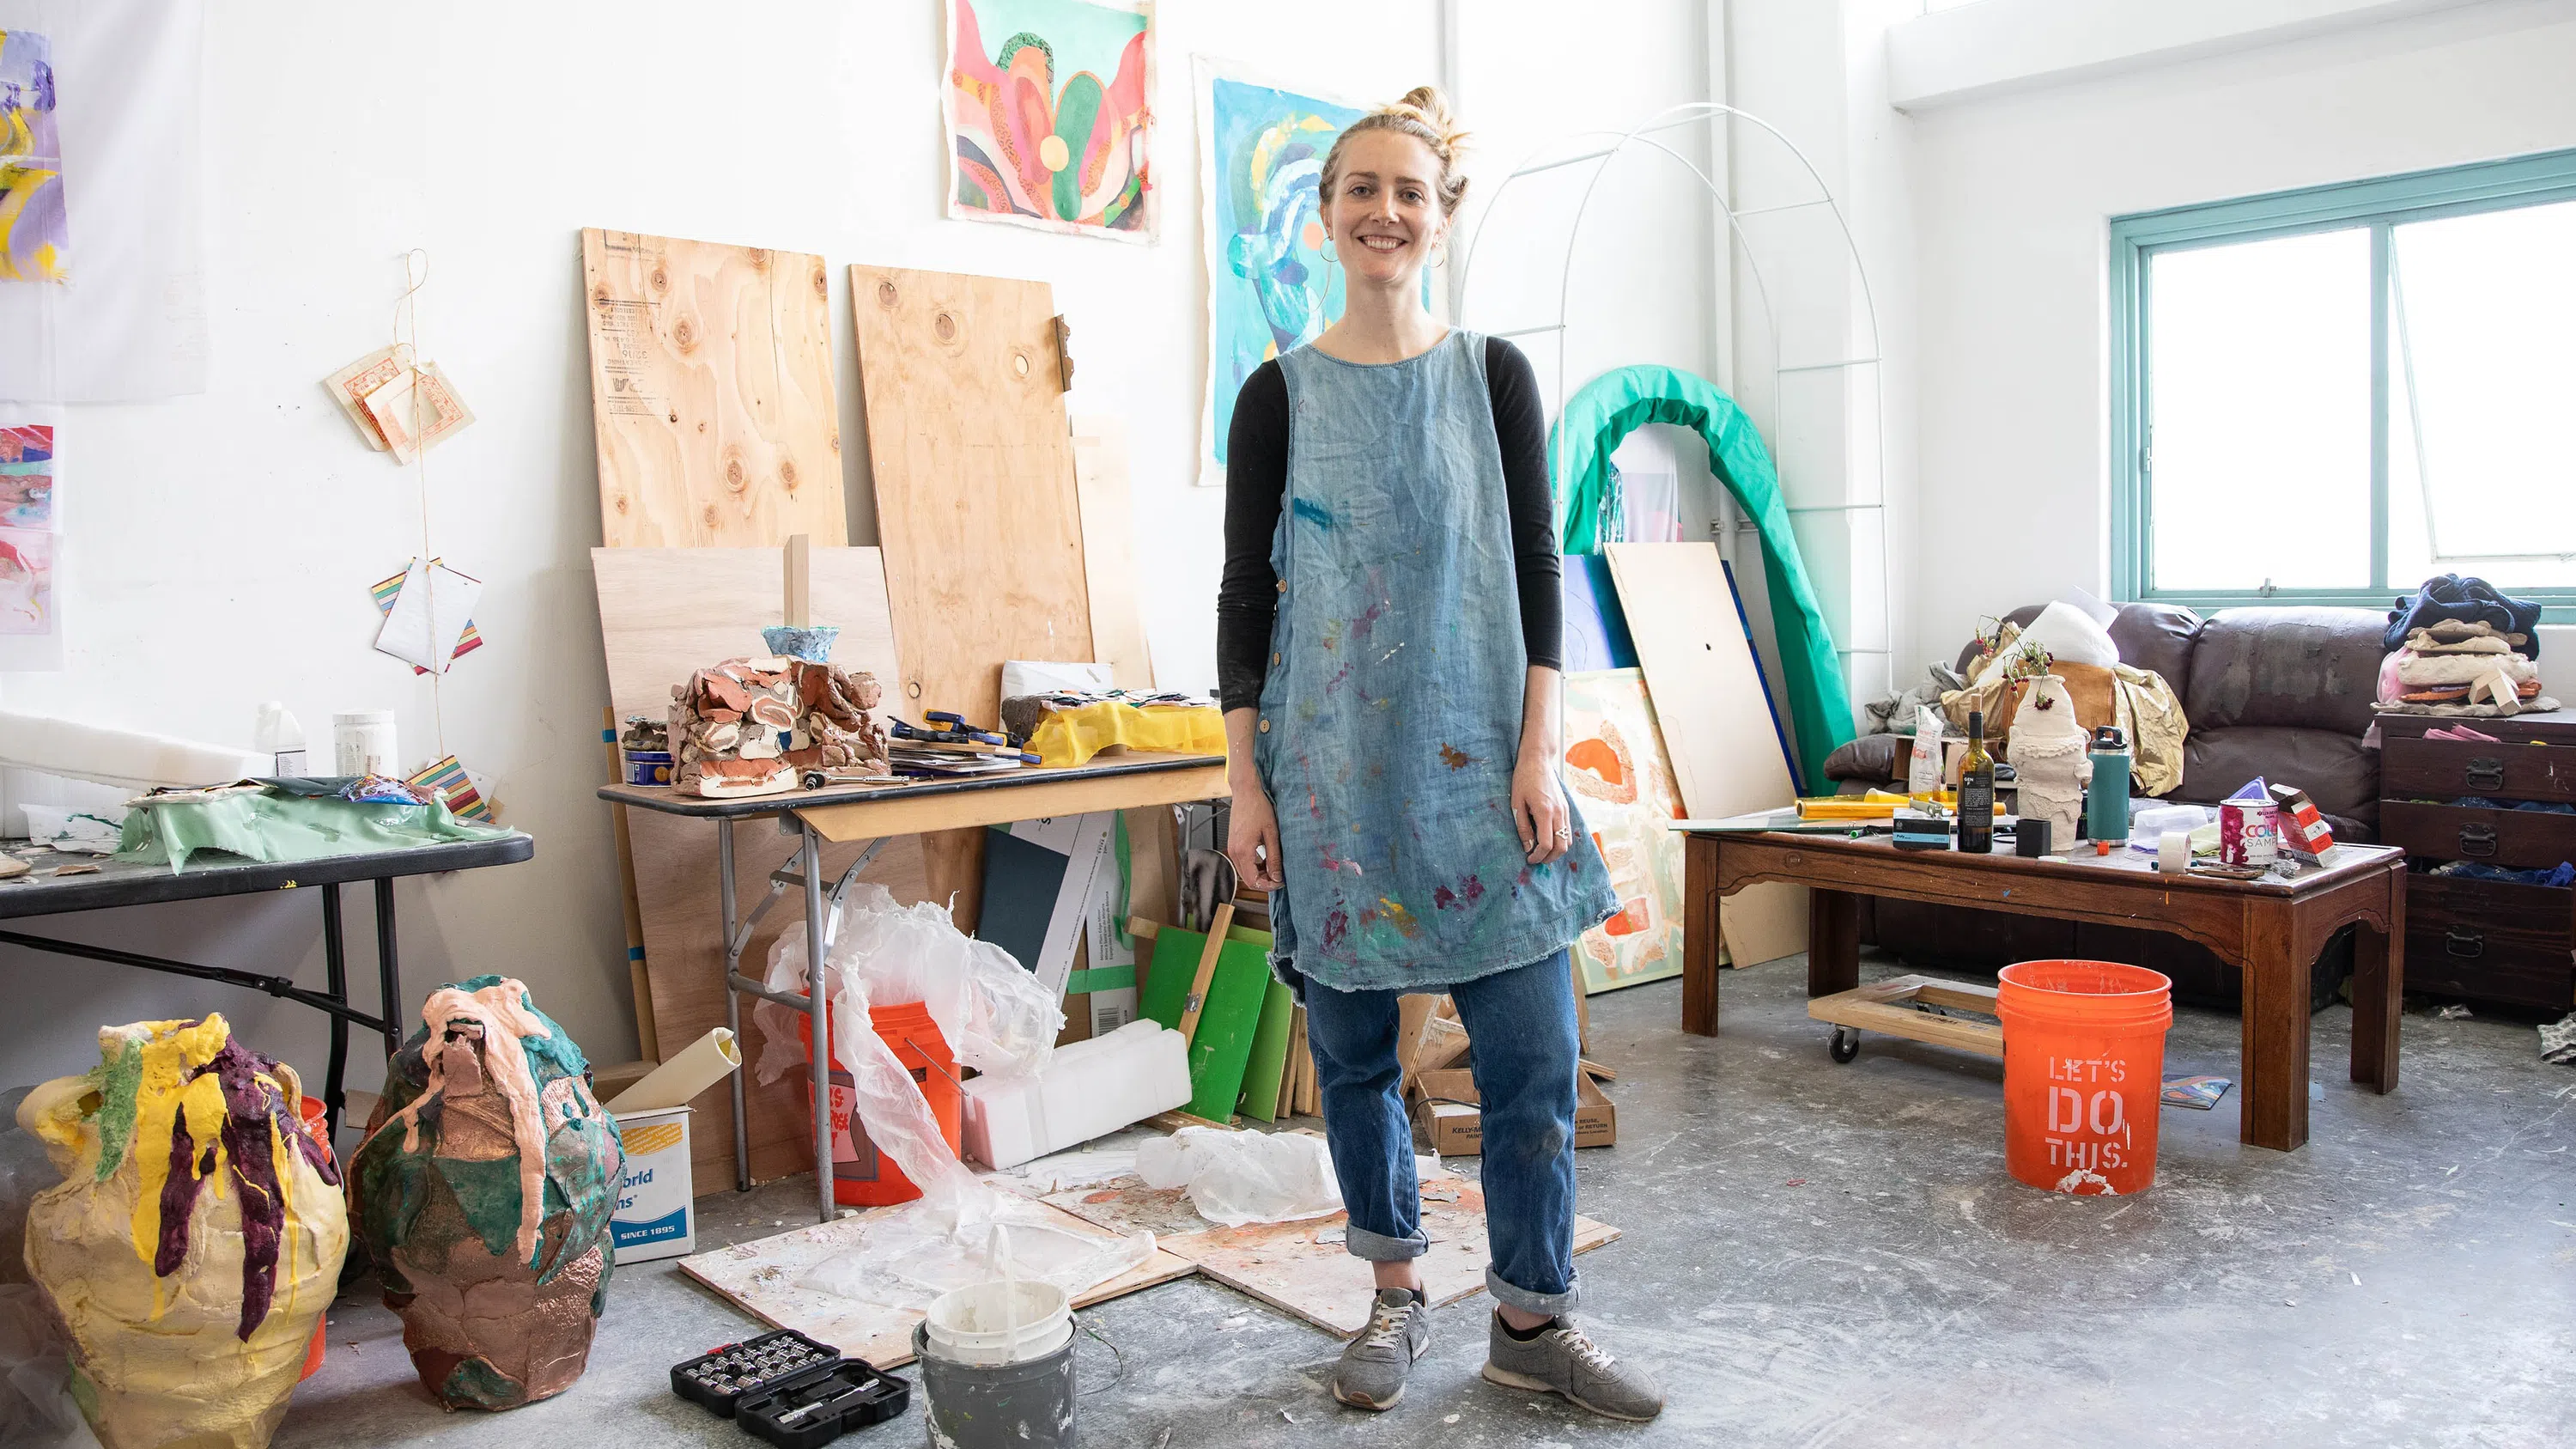  Courtney Odell stands in her studio in front of her artwork and supplies on the floor and walls. 